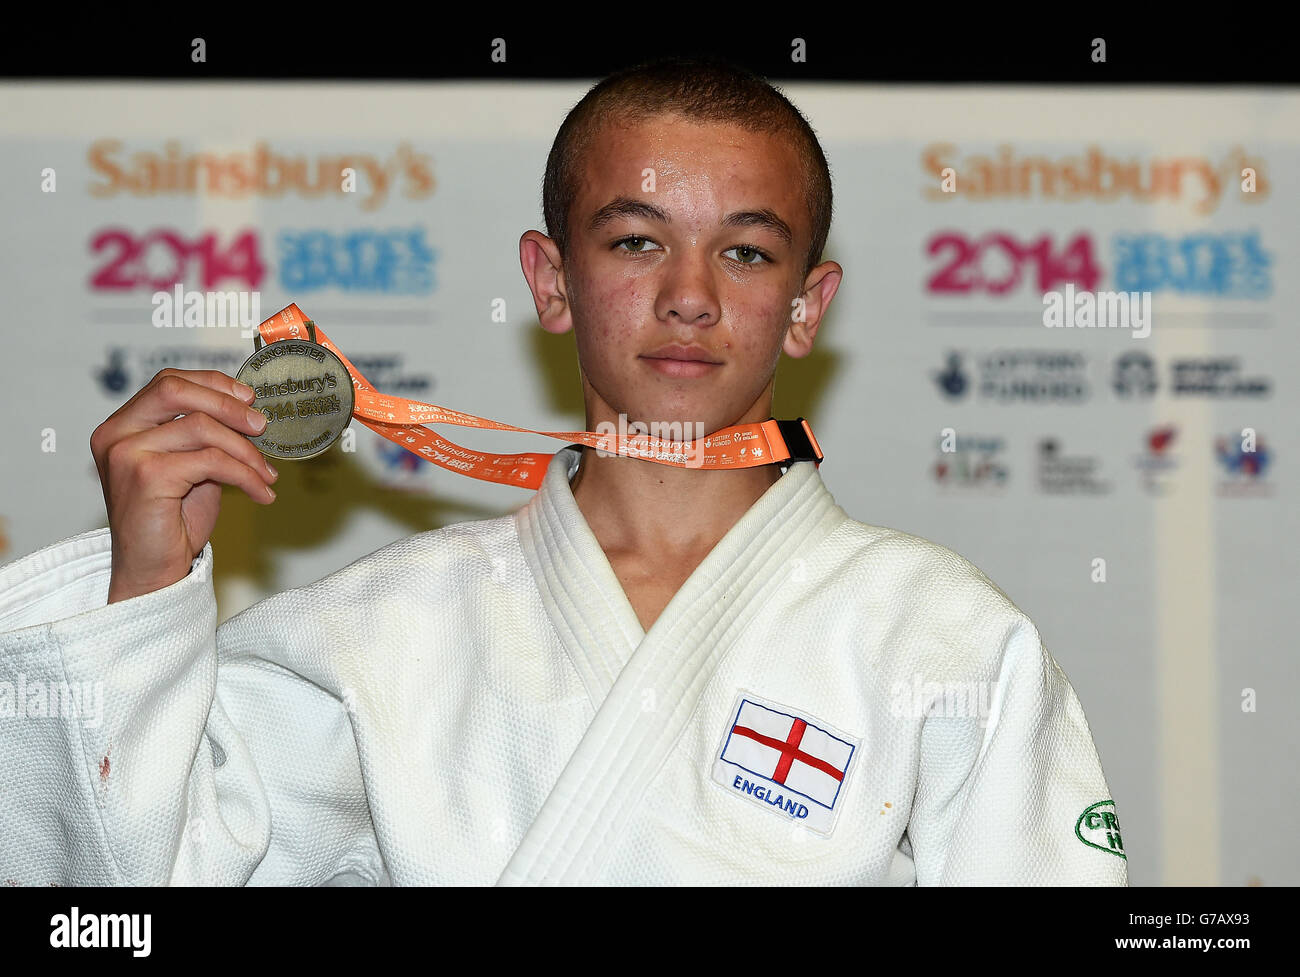 Sainsbury's 2014 School Games - 5th September 2014: Joshua Giles with his gold medal after winning the boys Under 50kg final during the Sainsbury's 2014 School Games at the Amaechi Centre, Manchester. Stock Photo